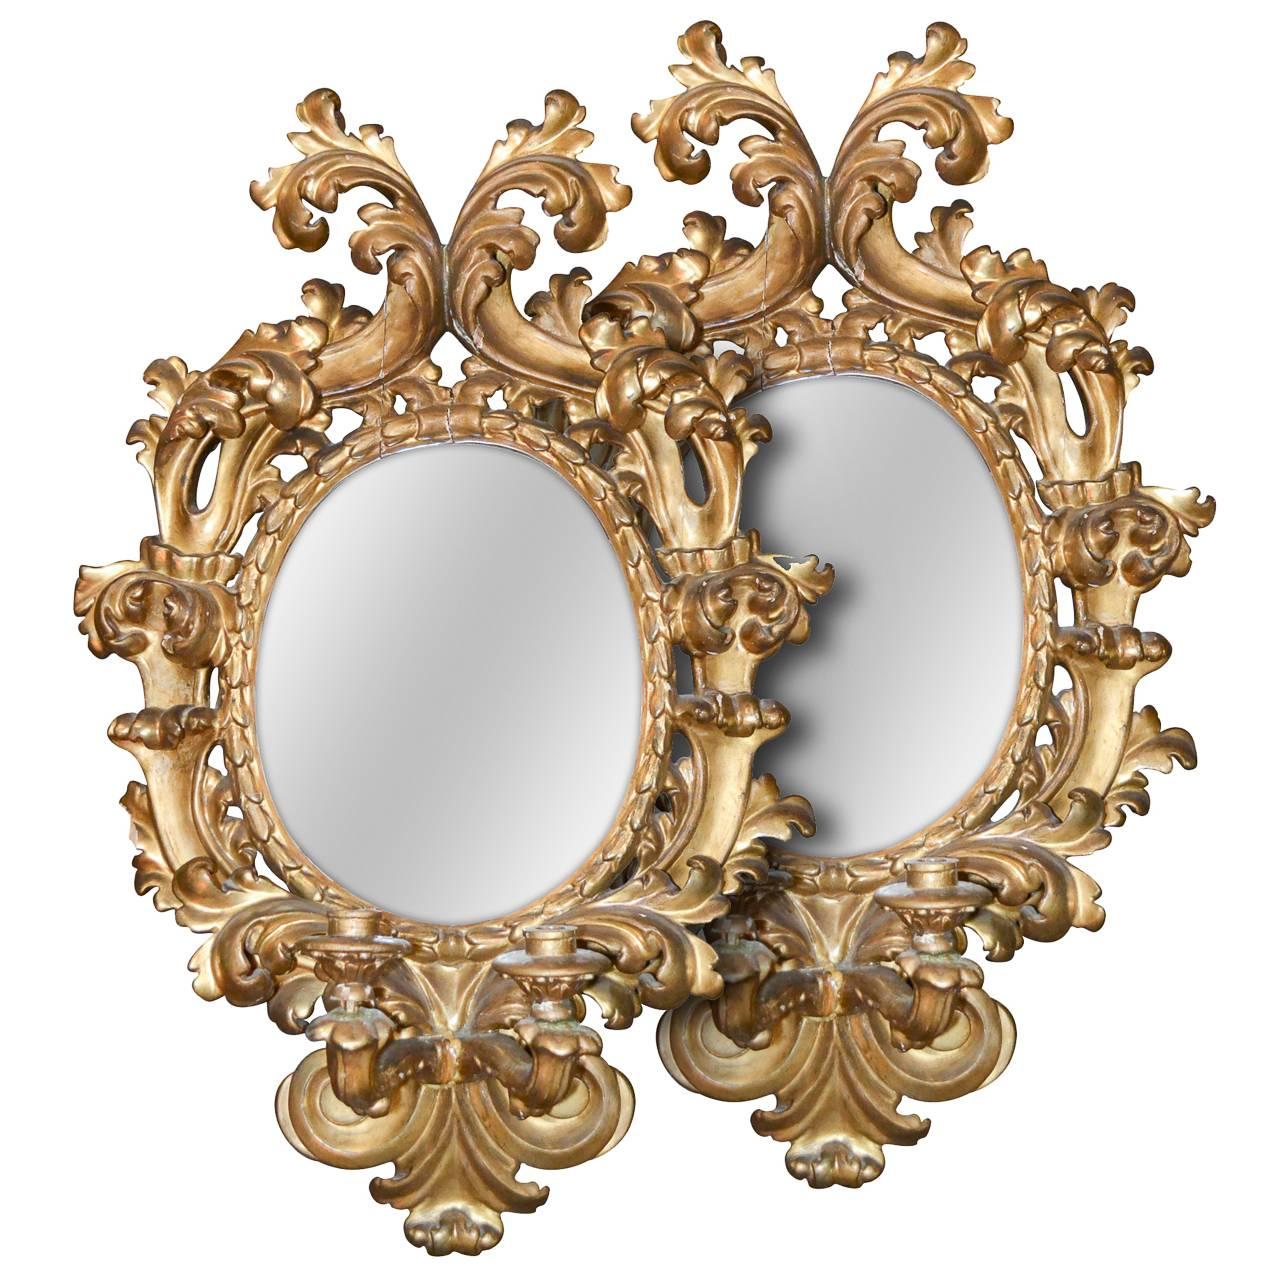 Early 19th Century Pair of Italian Baroque Giltwood Mirrors